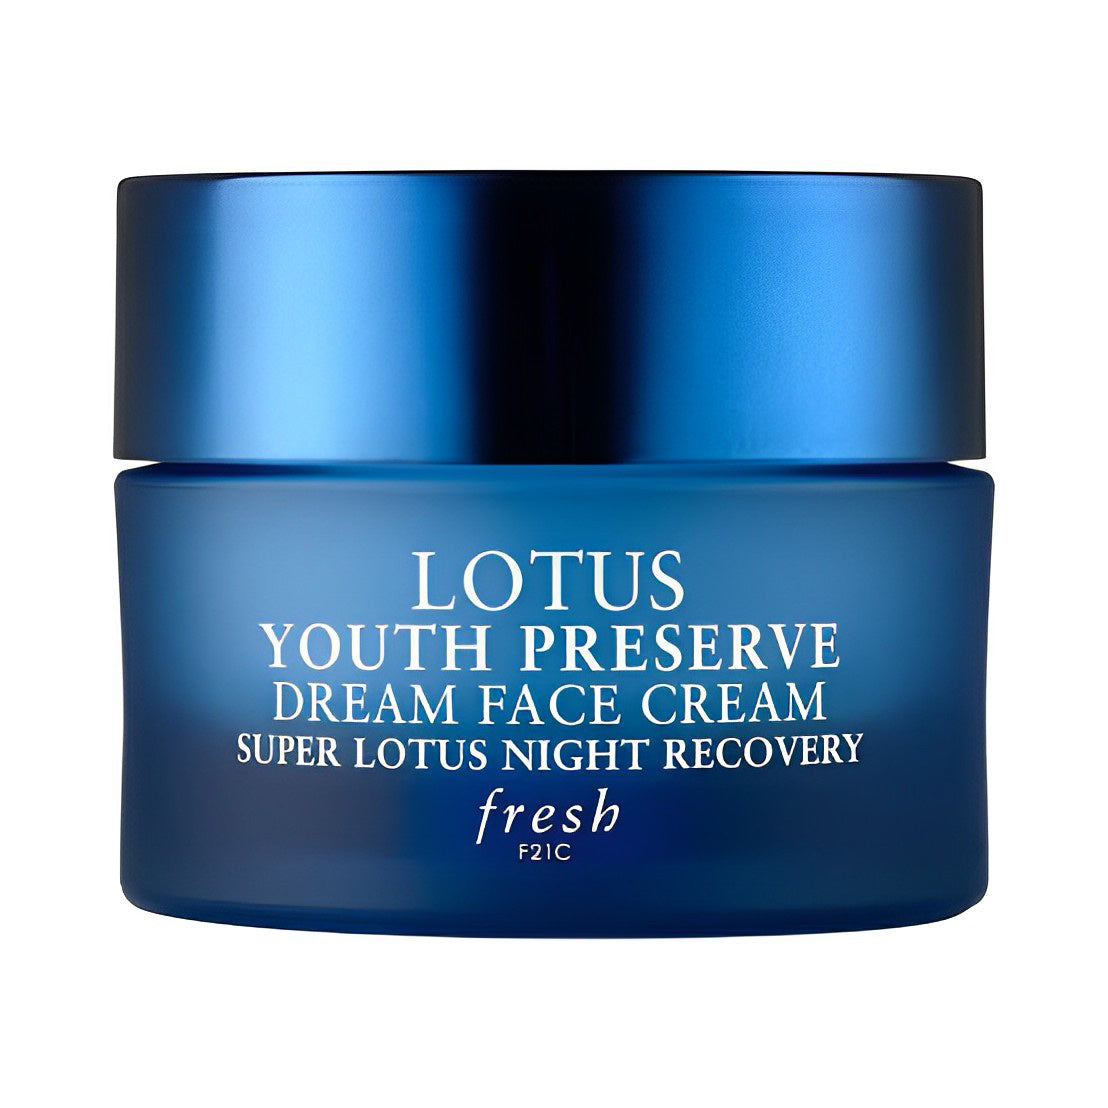 Lotus Youth Preserve Dream Face Cream Trial Size-Fresh